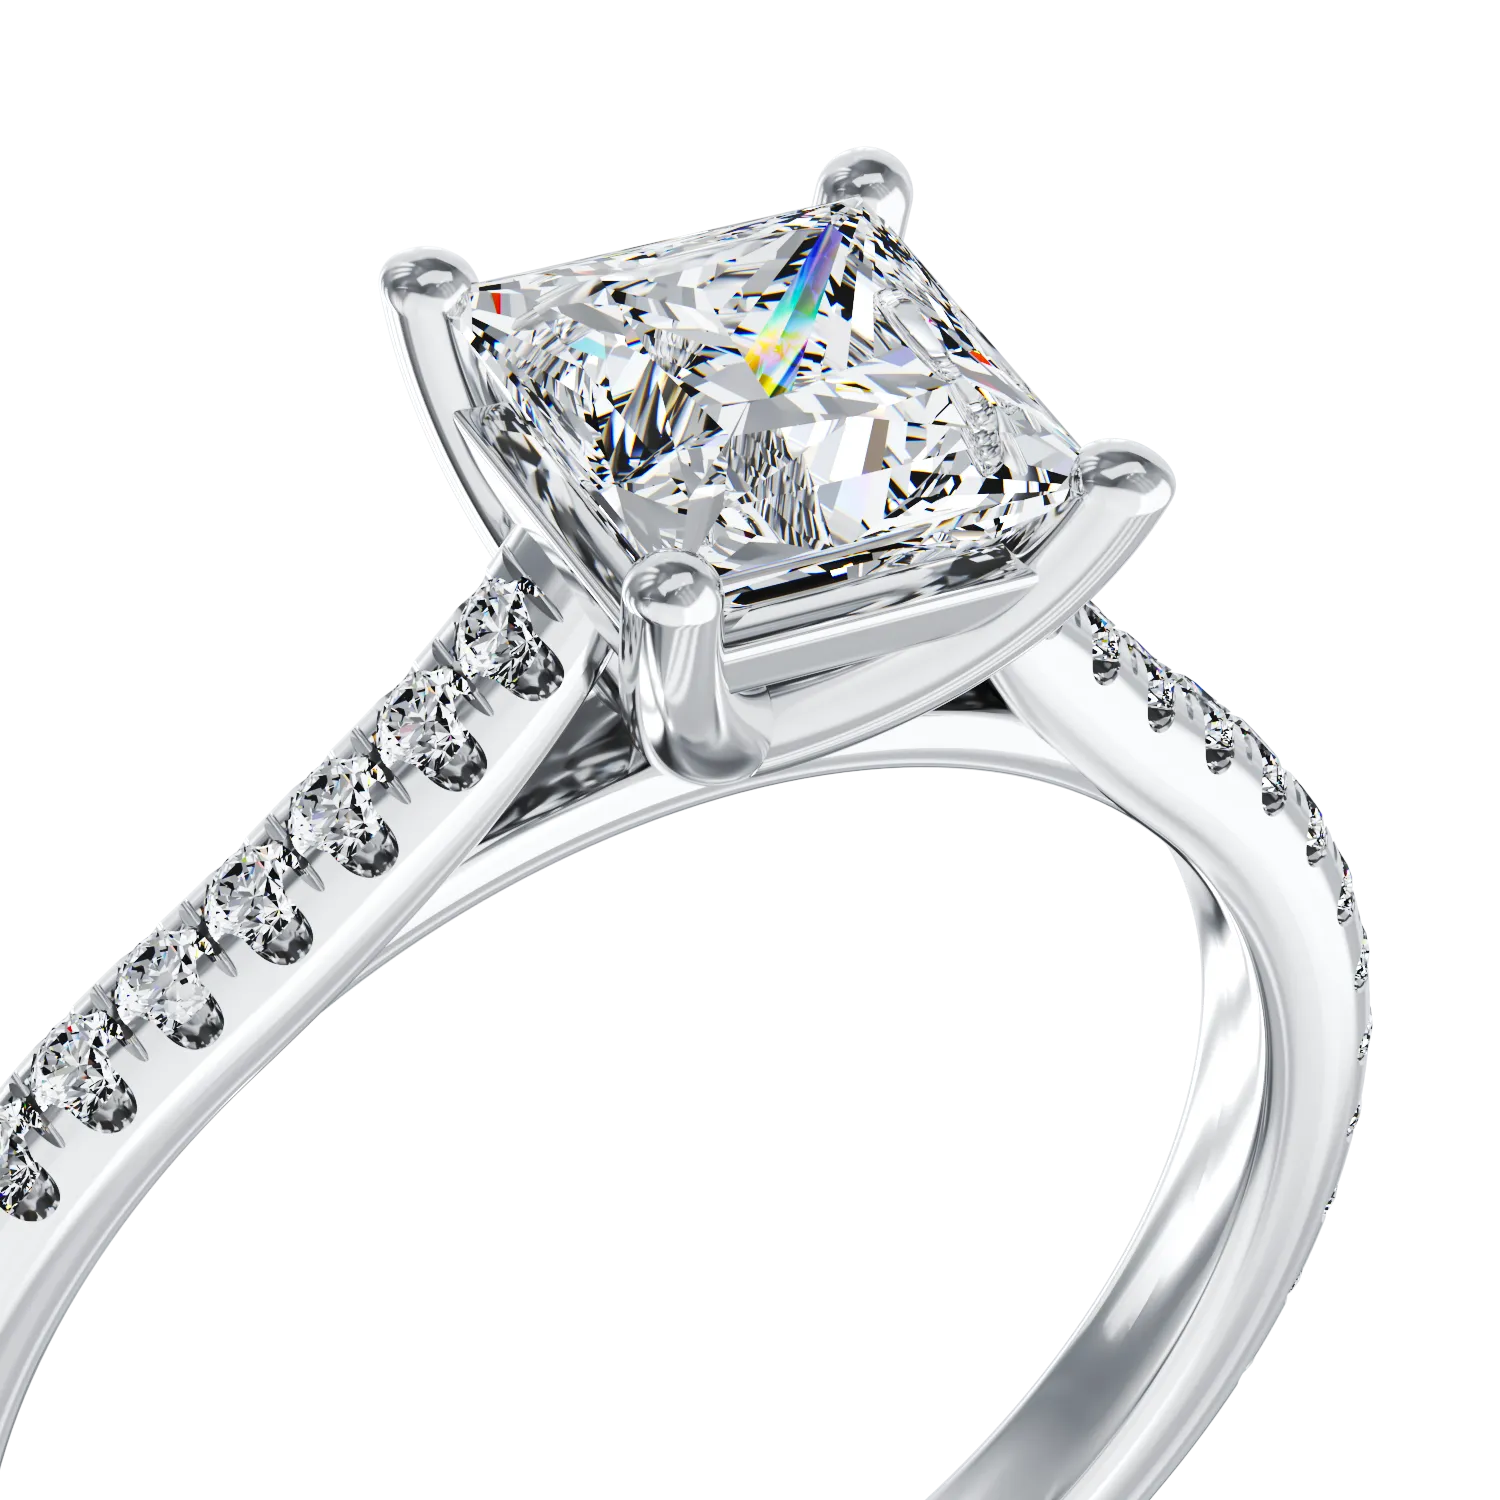 18K white gold engagement ring with 1.01ct diamond and 0.256ct diamonds